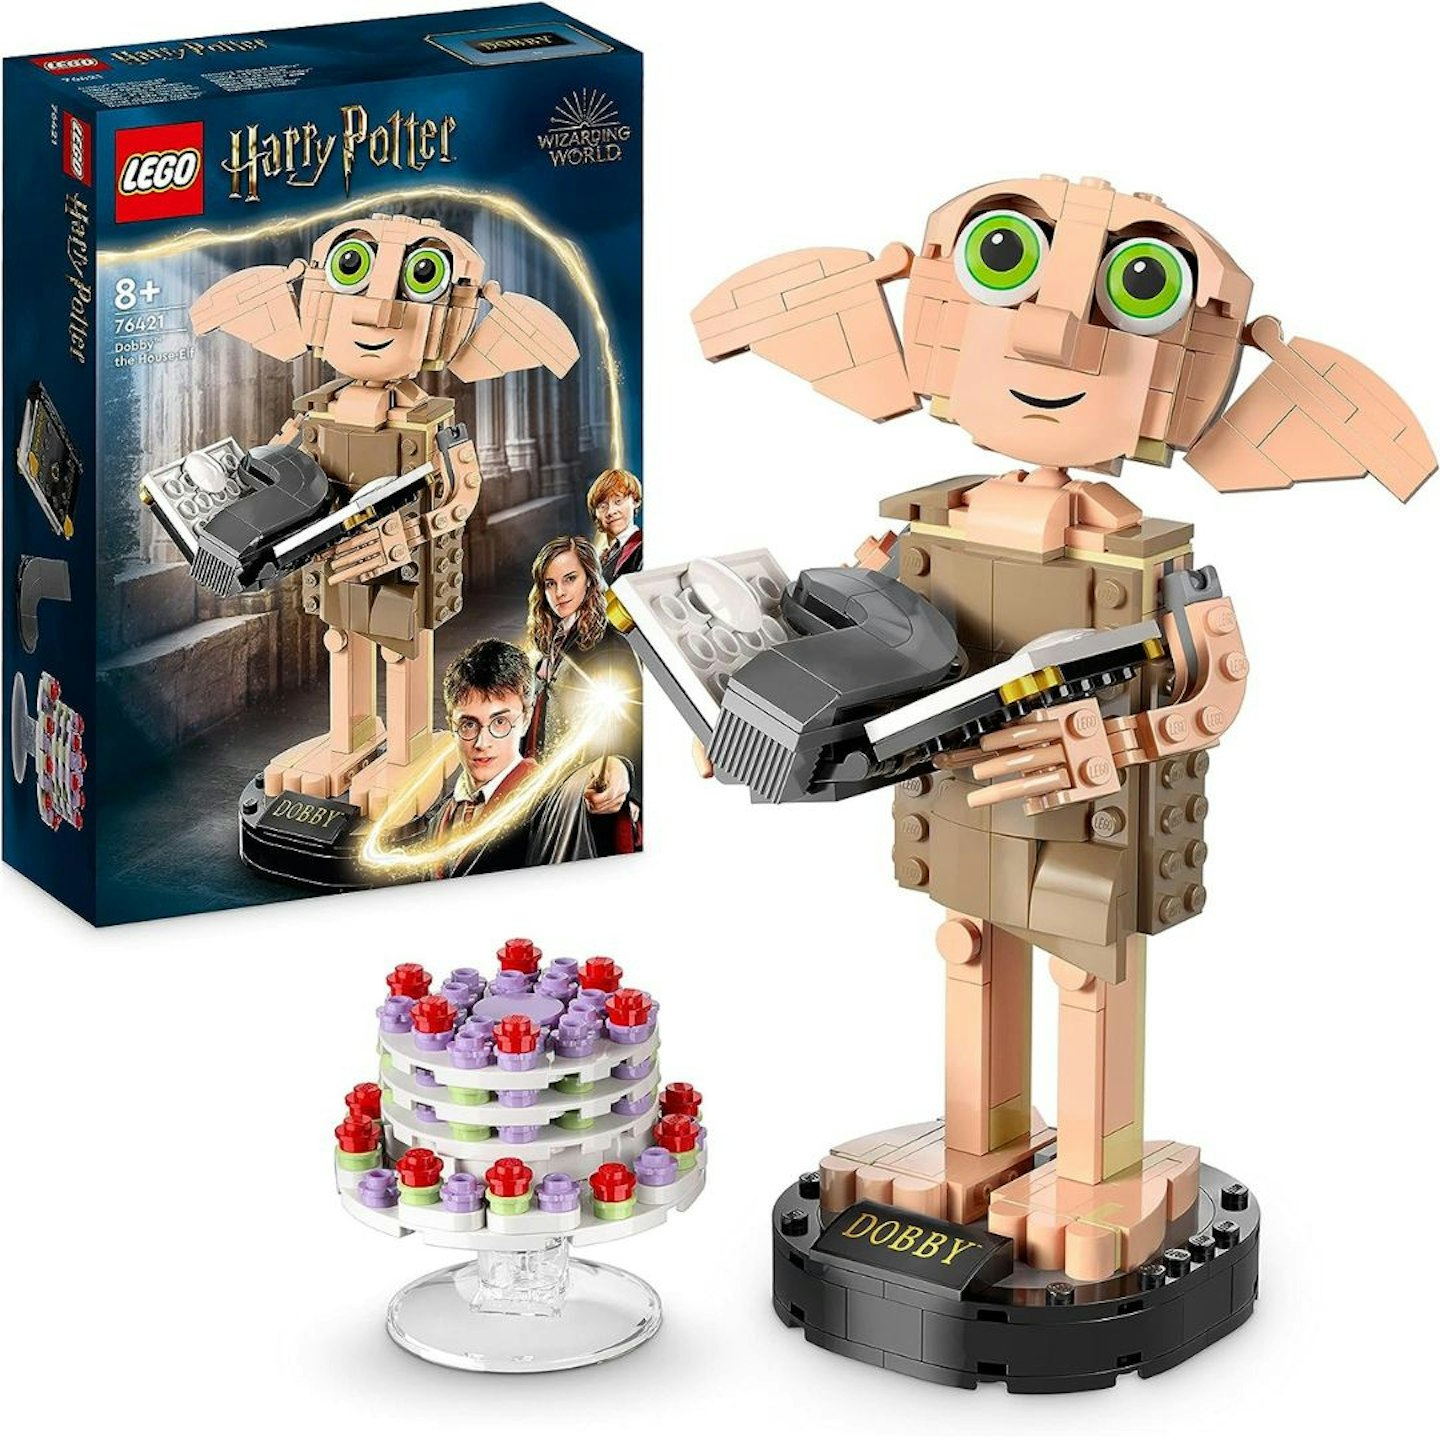 The best LEGO sets for adults: LEGO 76421 Harry Potter Dobby the House-Elf Set